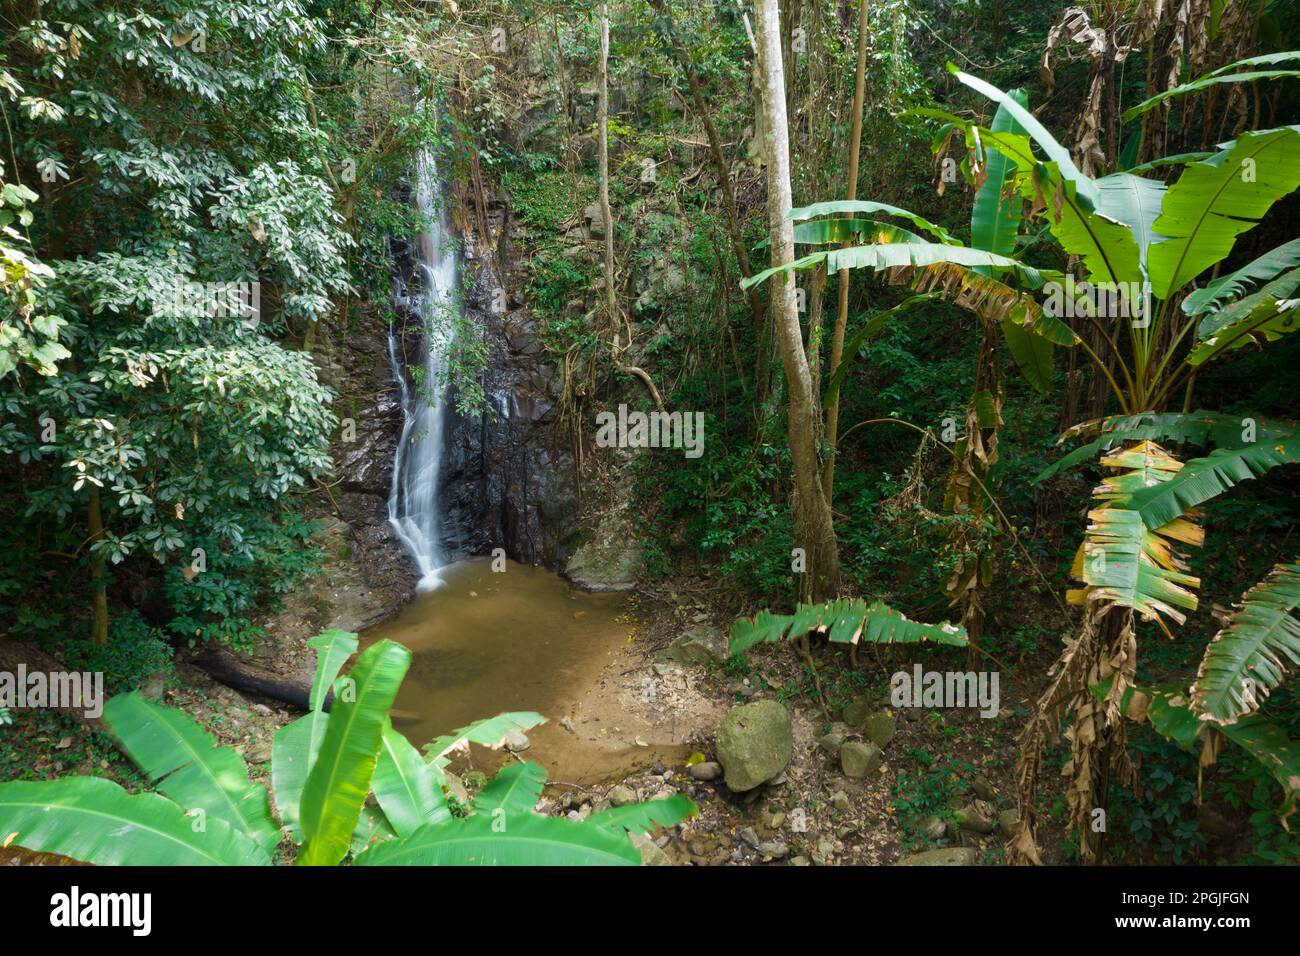 Hidden wild jungle waterfall in the Chiang dao forest, aerial shot. thailand Stock Photo